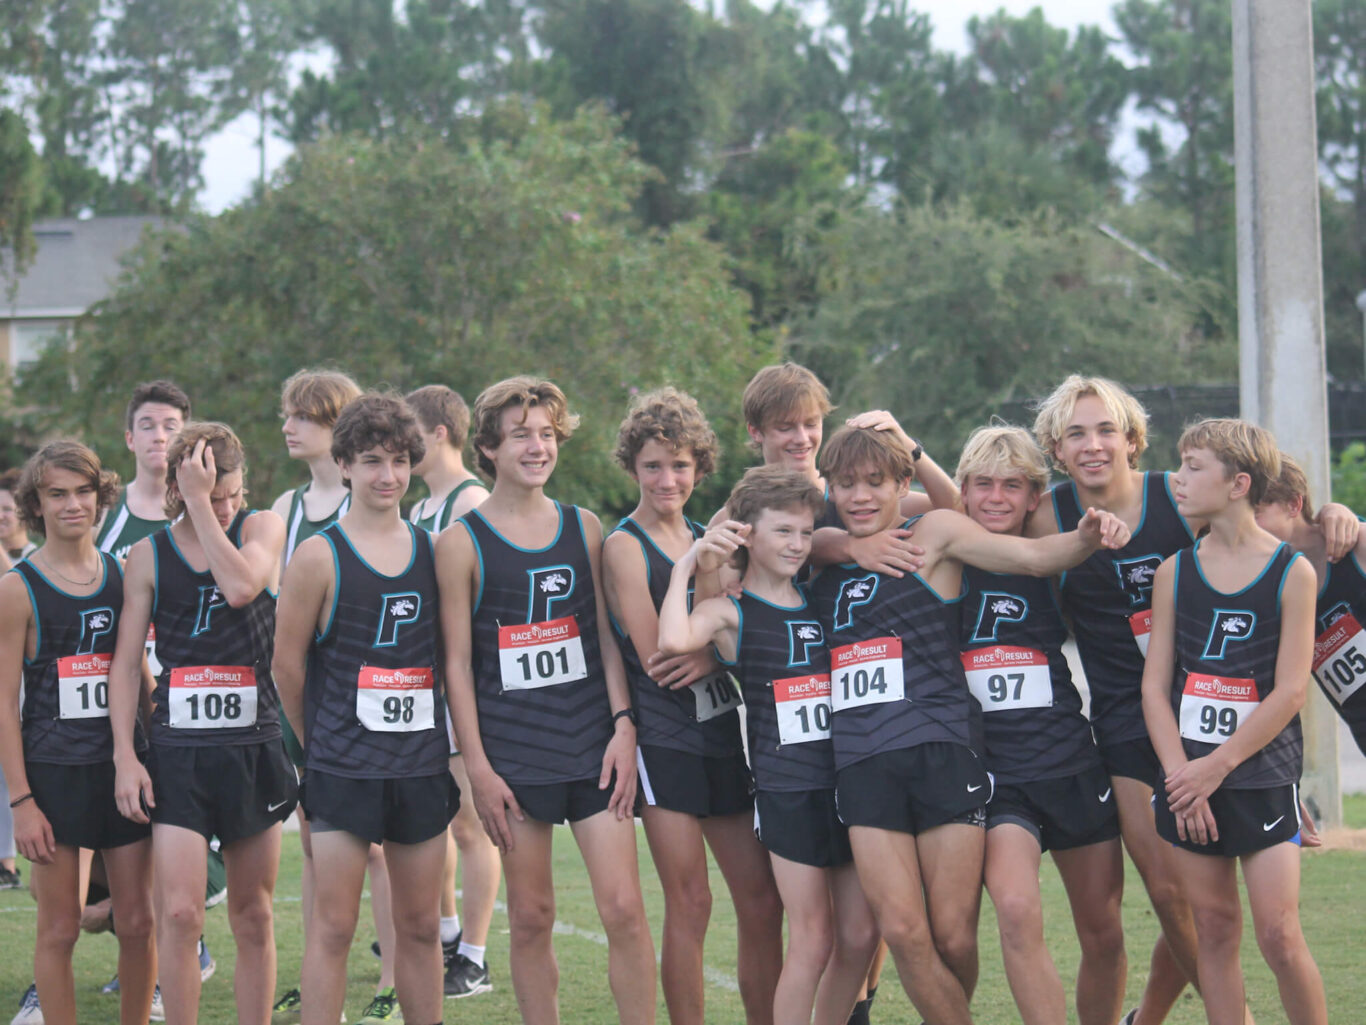 A group of boys from the cross country team posing for a picture.